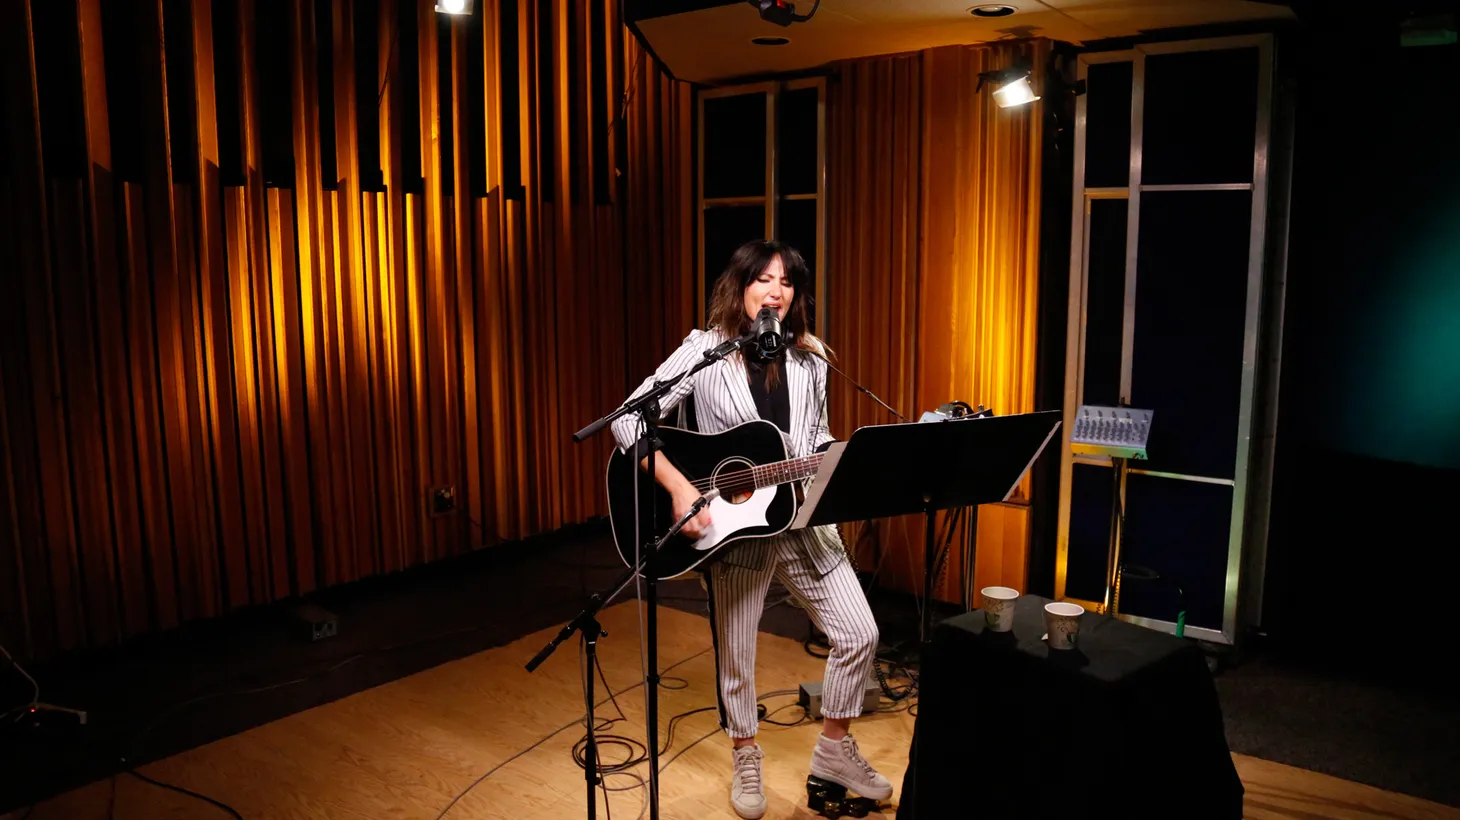 KT Tunstall visits our studio for a solo acoustic performance paying tribute to Fleetwood Mac.